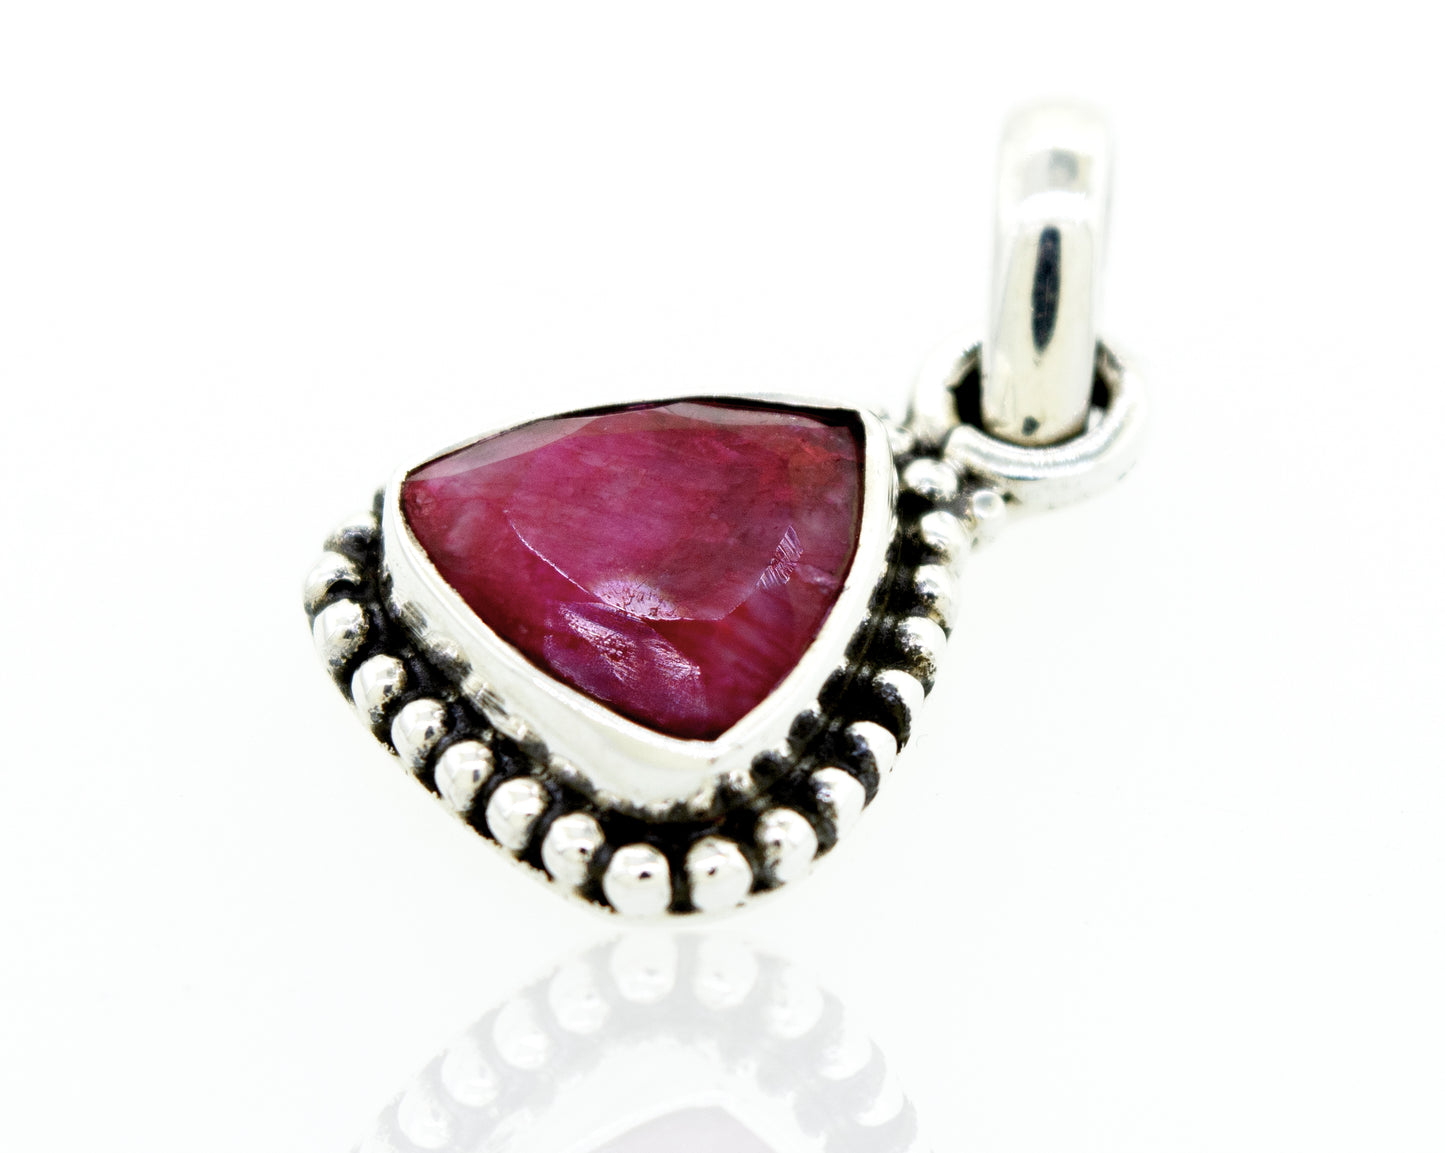 A Super Silver beautiful triangular shape ruby pendant with beads design in a silver setting.